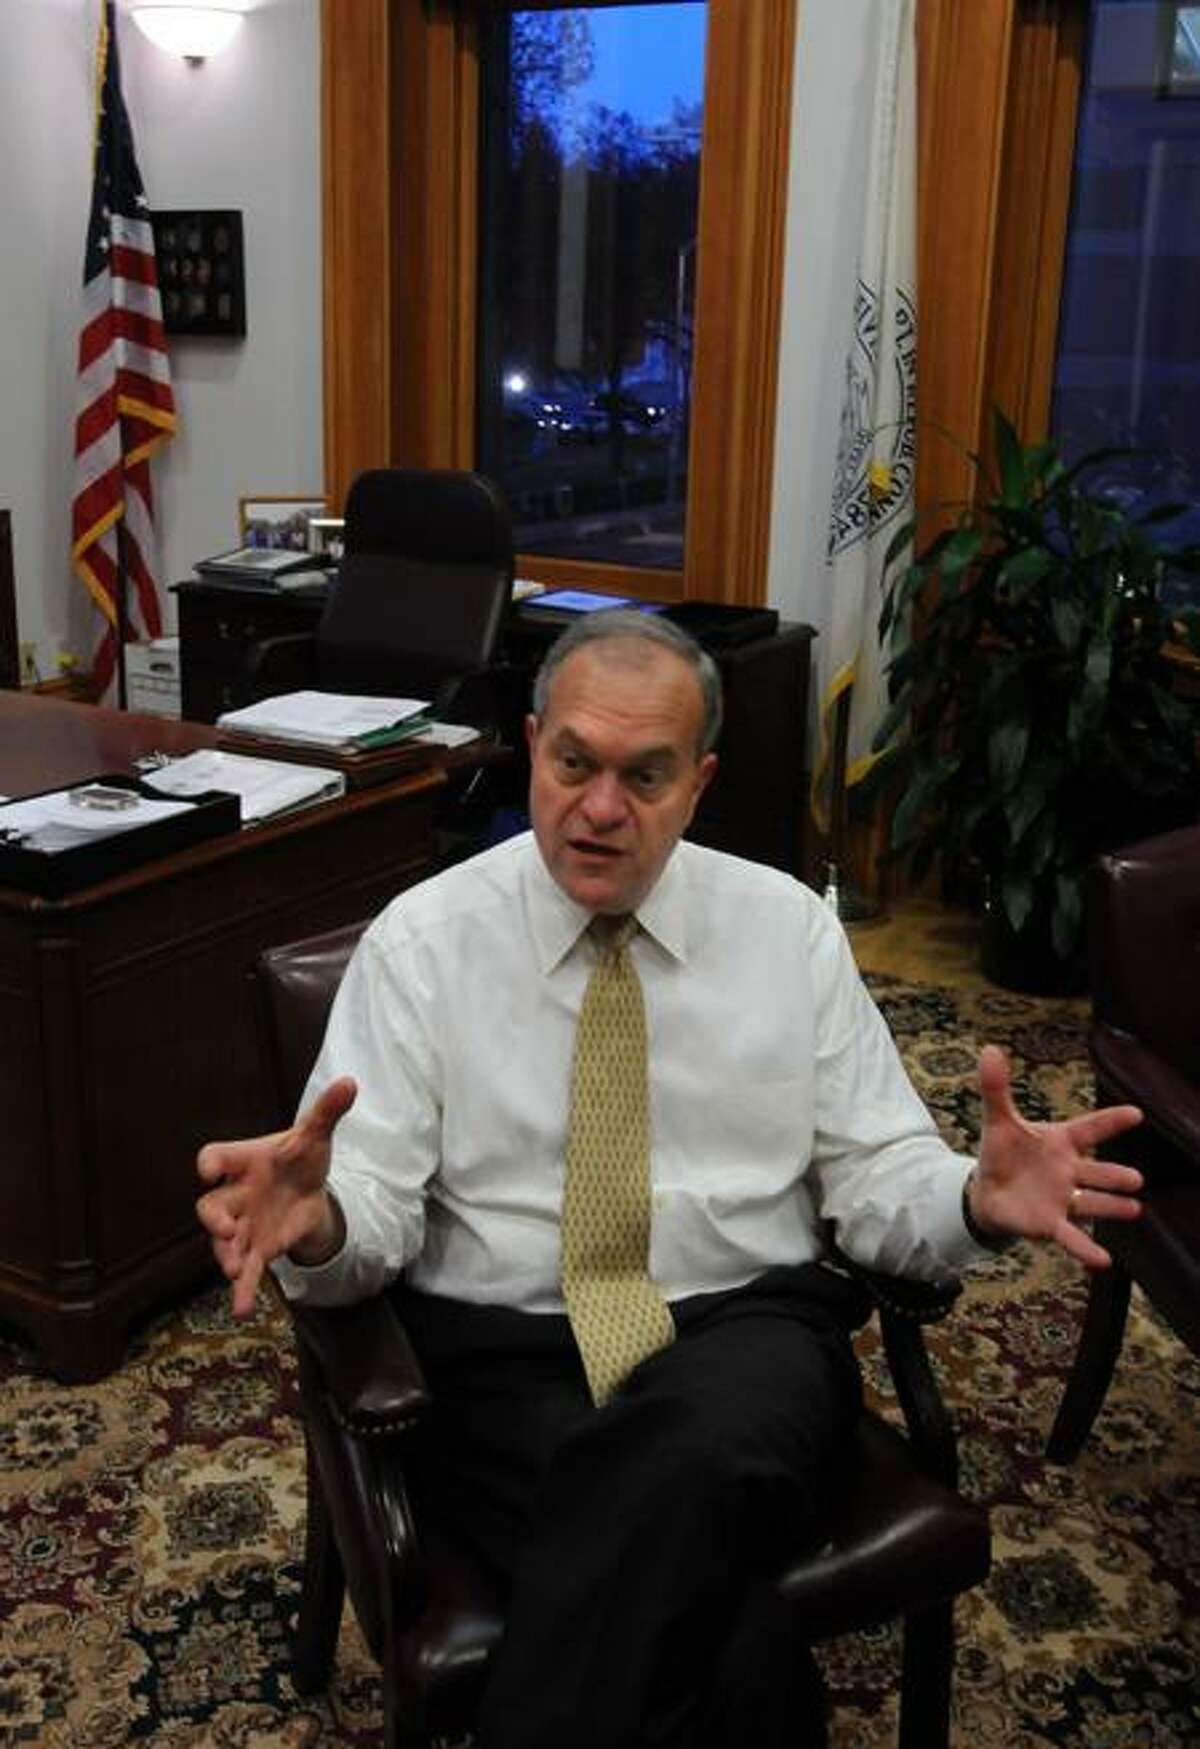 New Haven Mayor John DeStefano, Jr. in his office in City Hall during an interview with the Register. Photo by Mara Lavitt/New Haven Register11/9/11